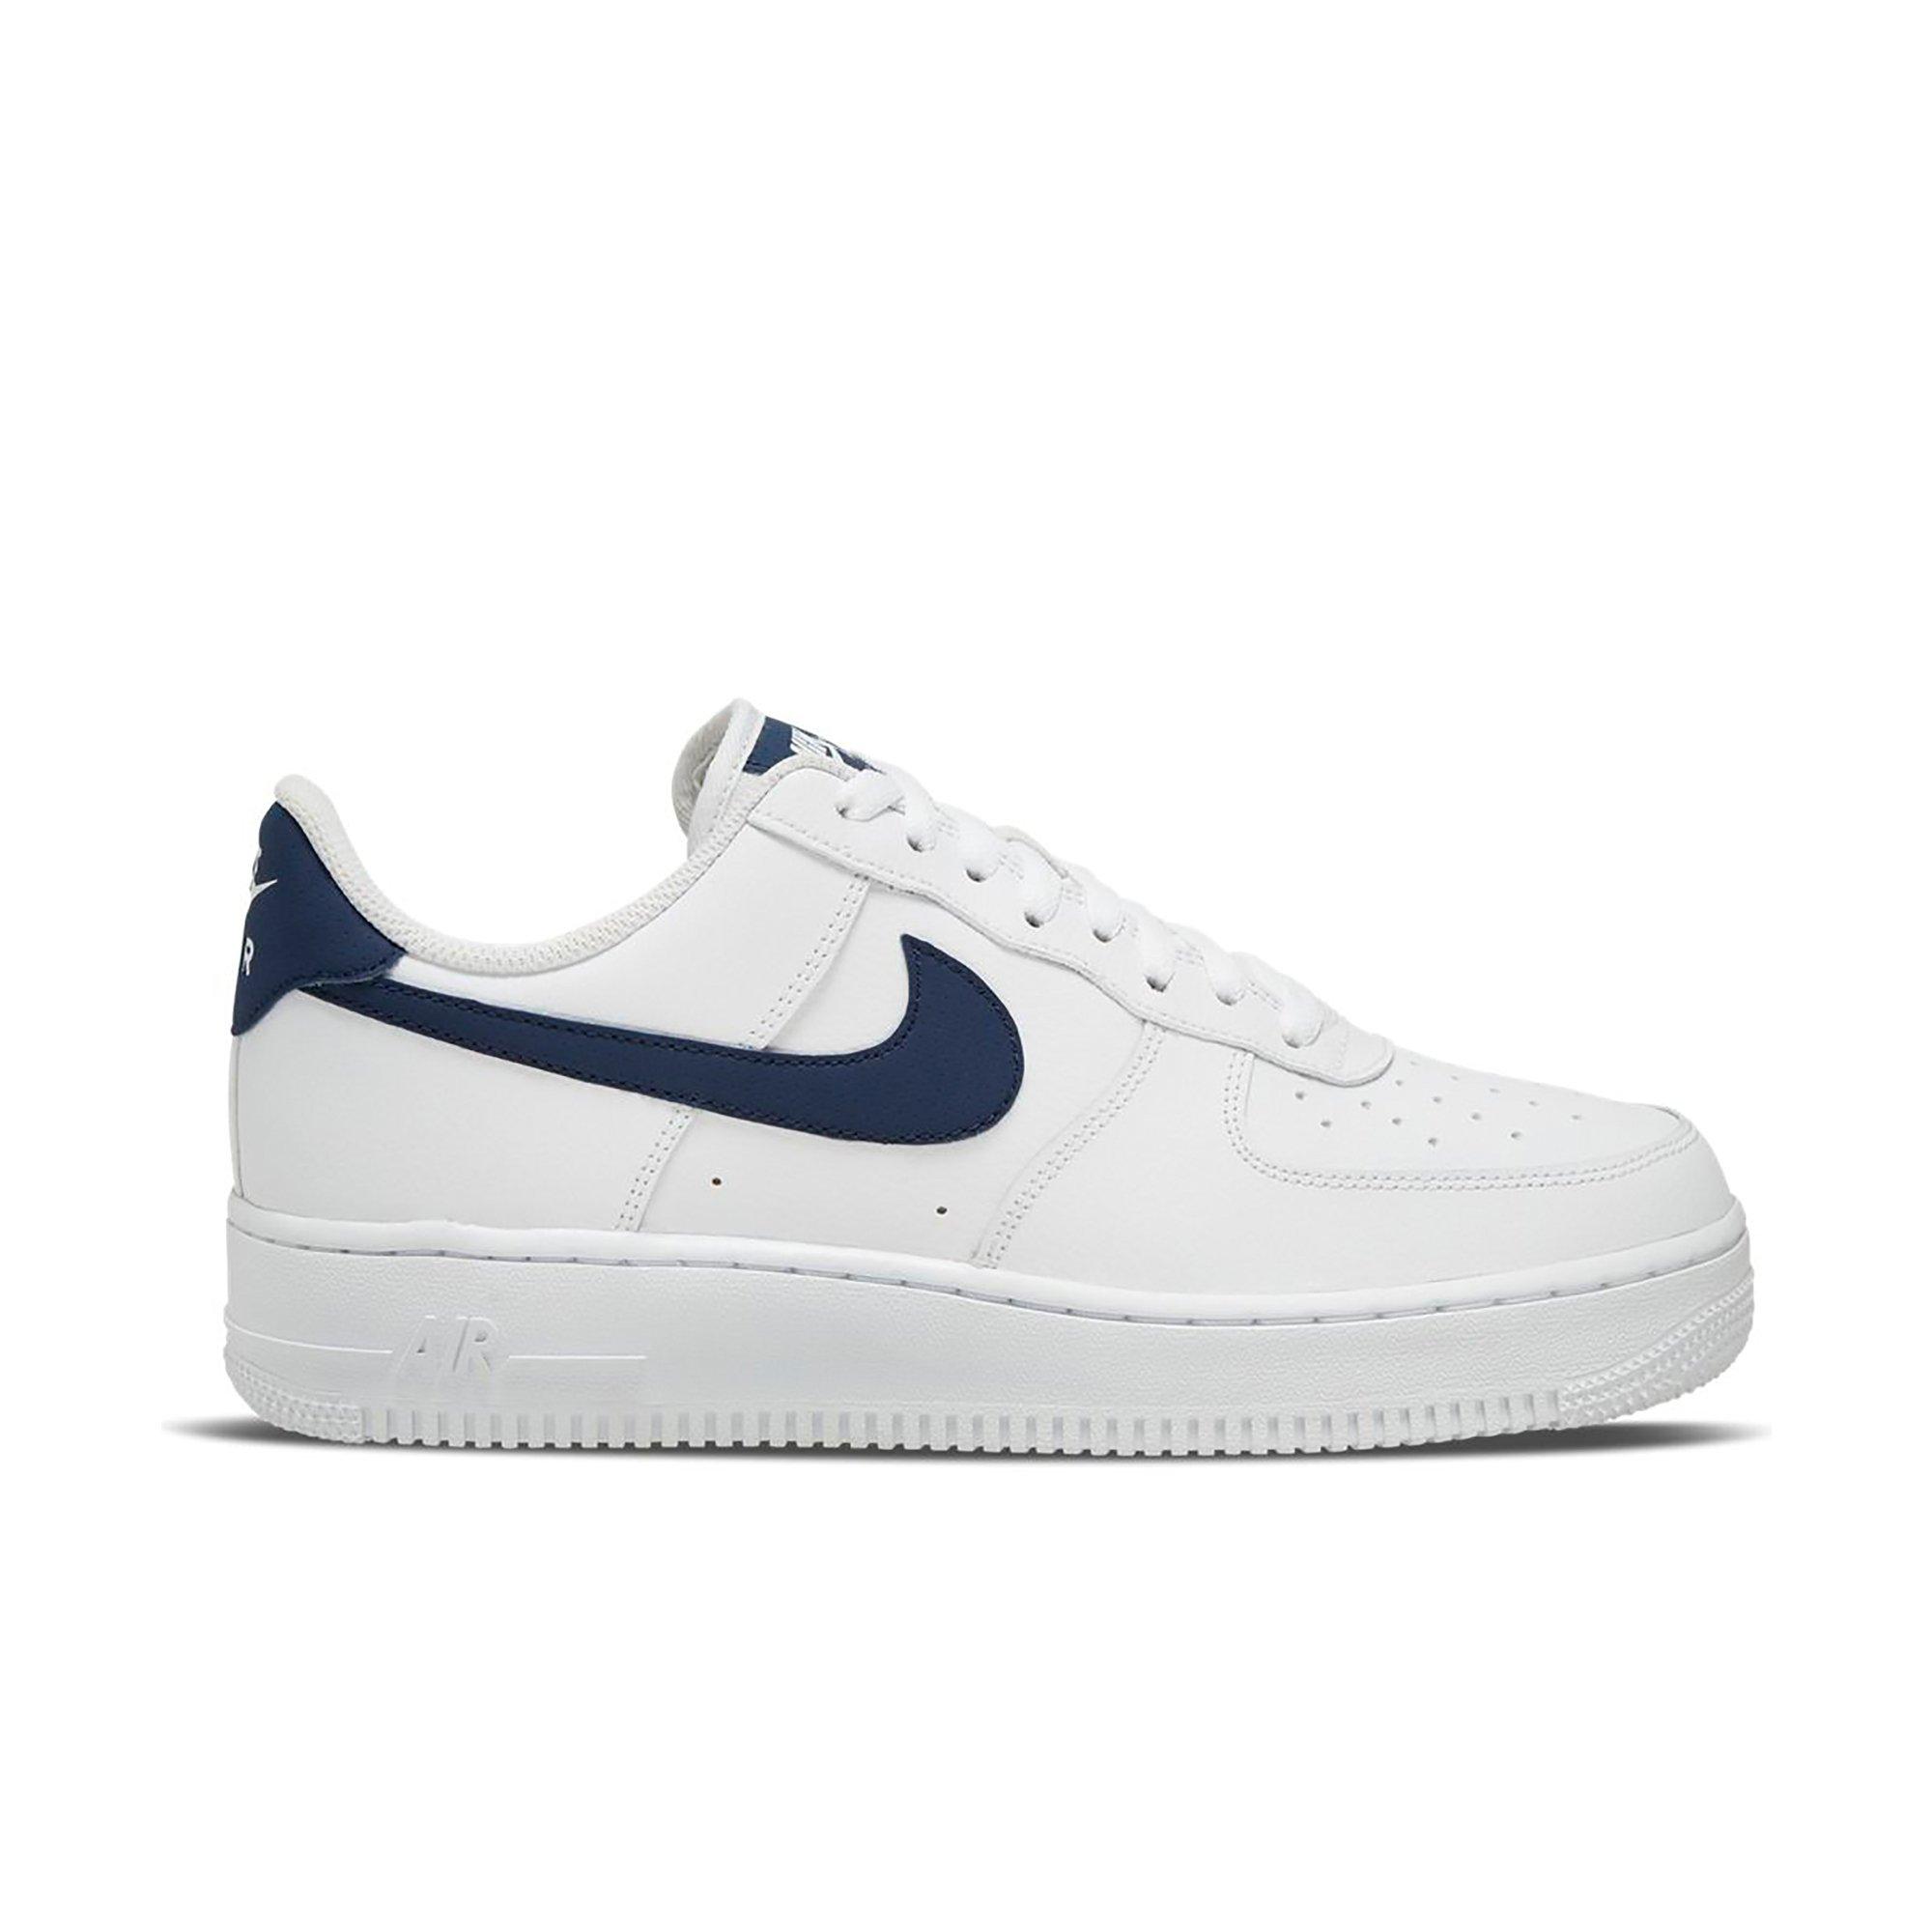 white and navy blue forces